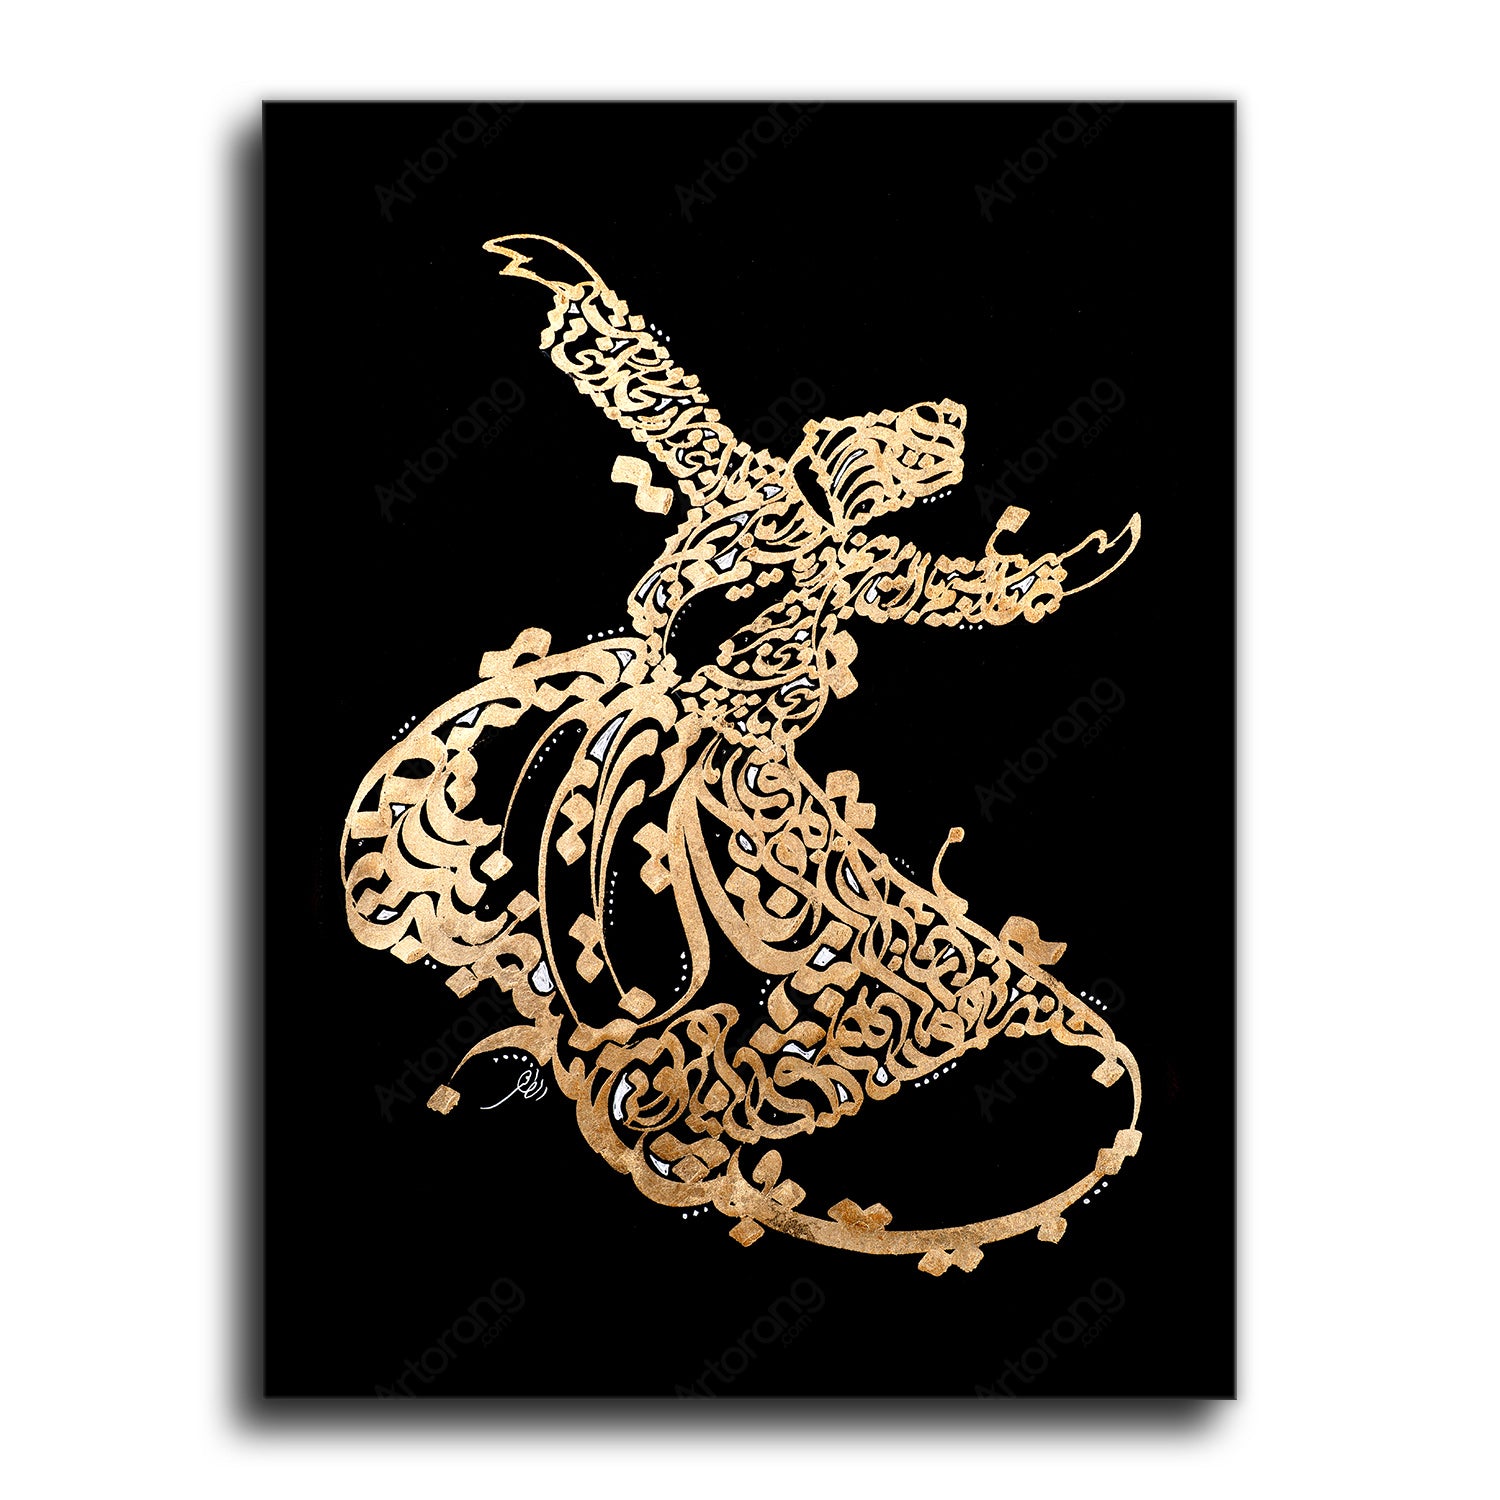 Ancient Sufi dance and Rumi's whirling dervishes with calligraphy painting print | Middle Eastern art | Iranian painting |Arabic art | Turkish art - Artorang